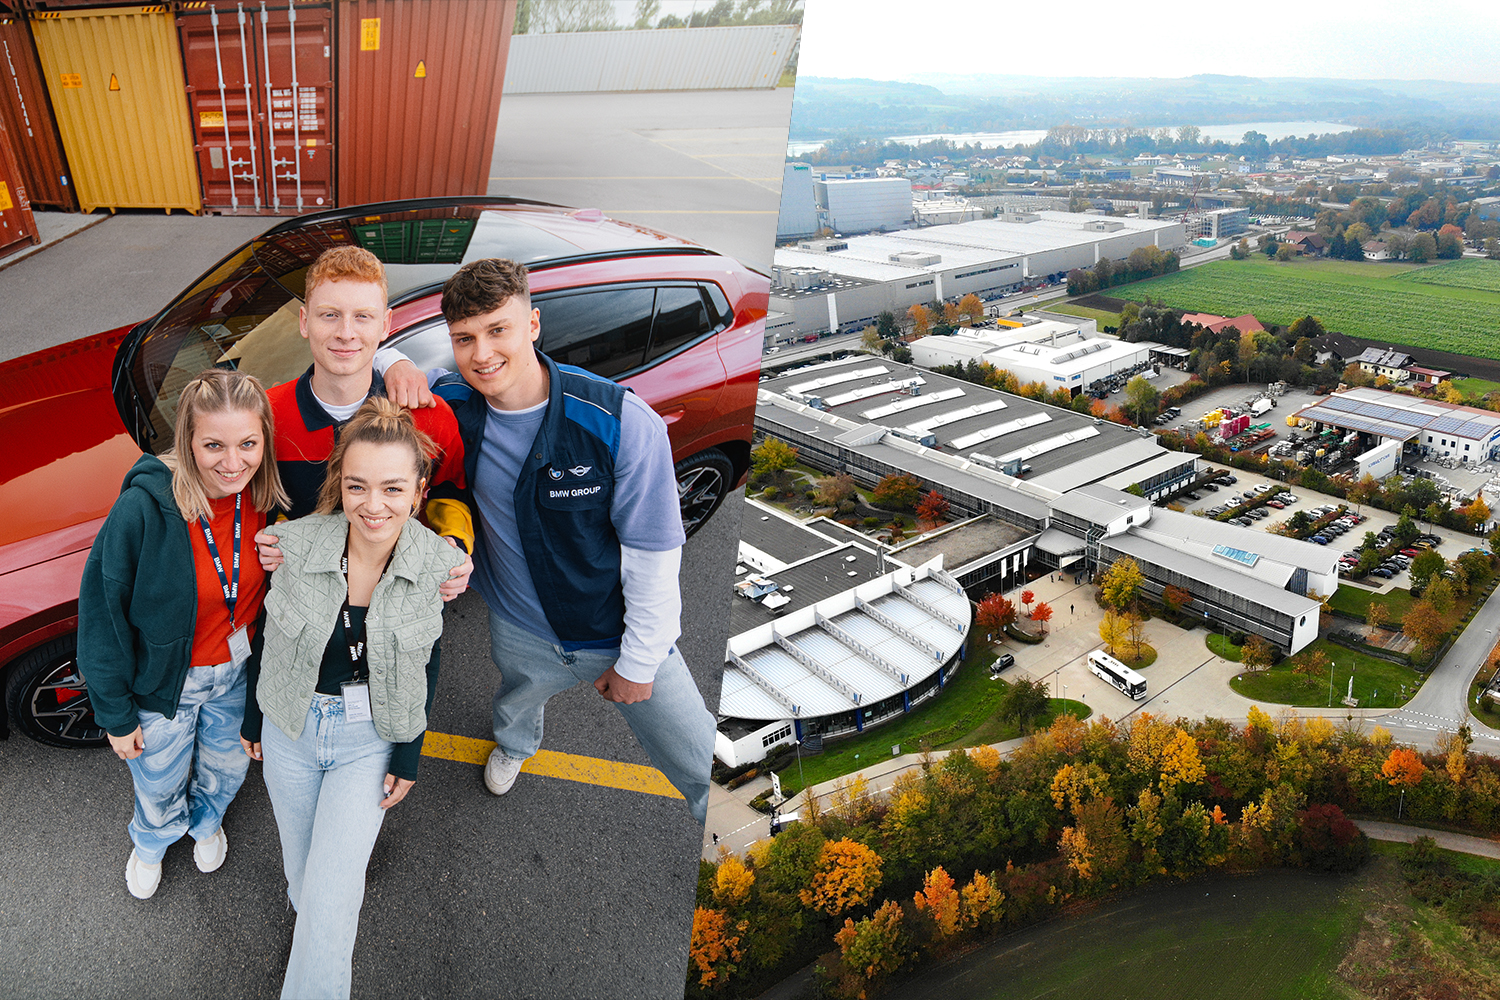 Apprentices with a BMW X2 and aerial view of the BMW Dingolfing plant